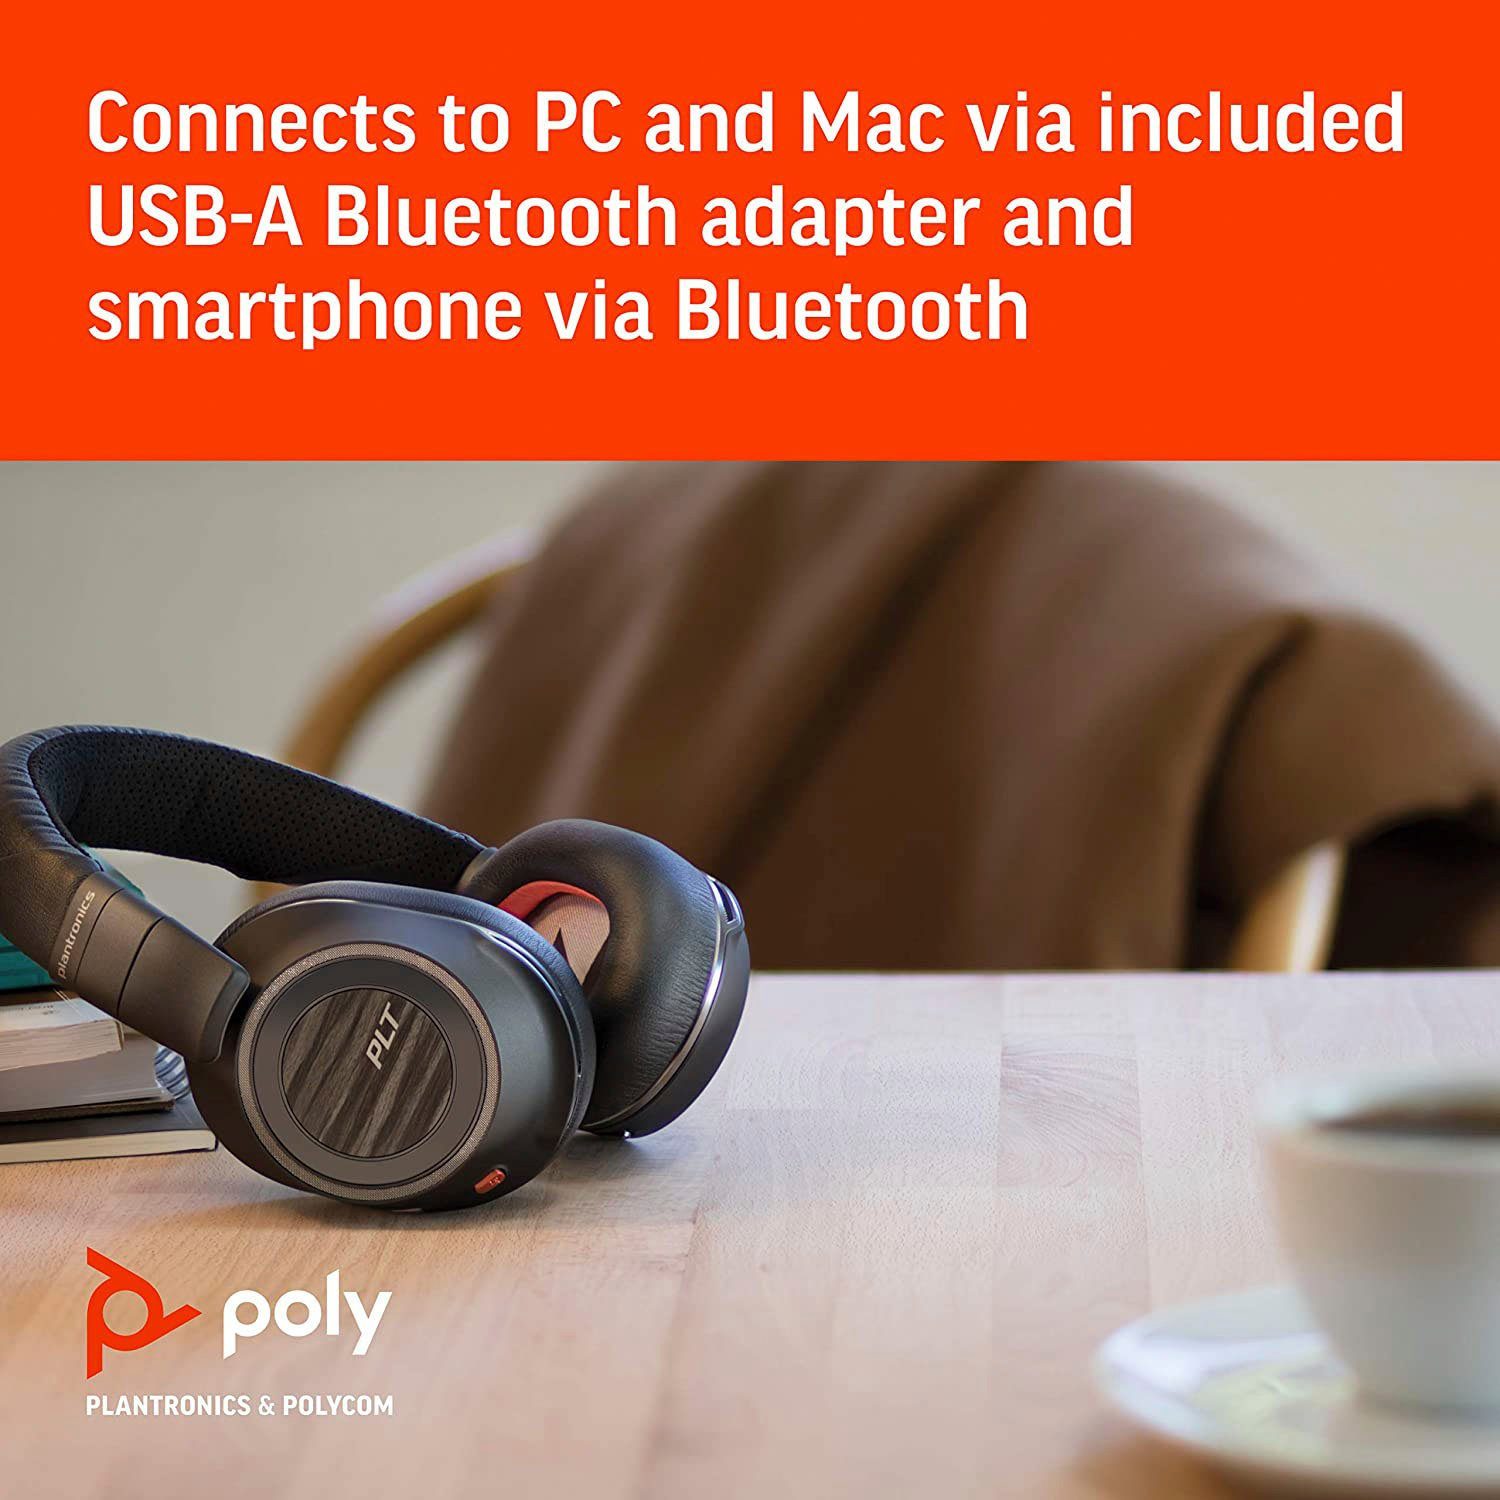 Plantronics Poly Voyager 8200 UC Bluetooth HSP) Distribution Profile), Video Remote HFP, Musik, (Noise-Cancelling, (Advanced Wireless-Headset Anrufe Steuerung und integrierte A2DP Audio Profile), für AVRCP Control Bluetooth (Audio